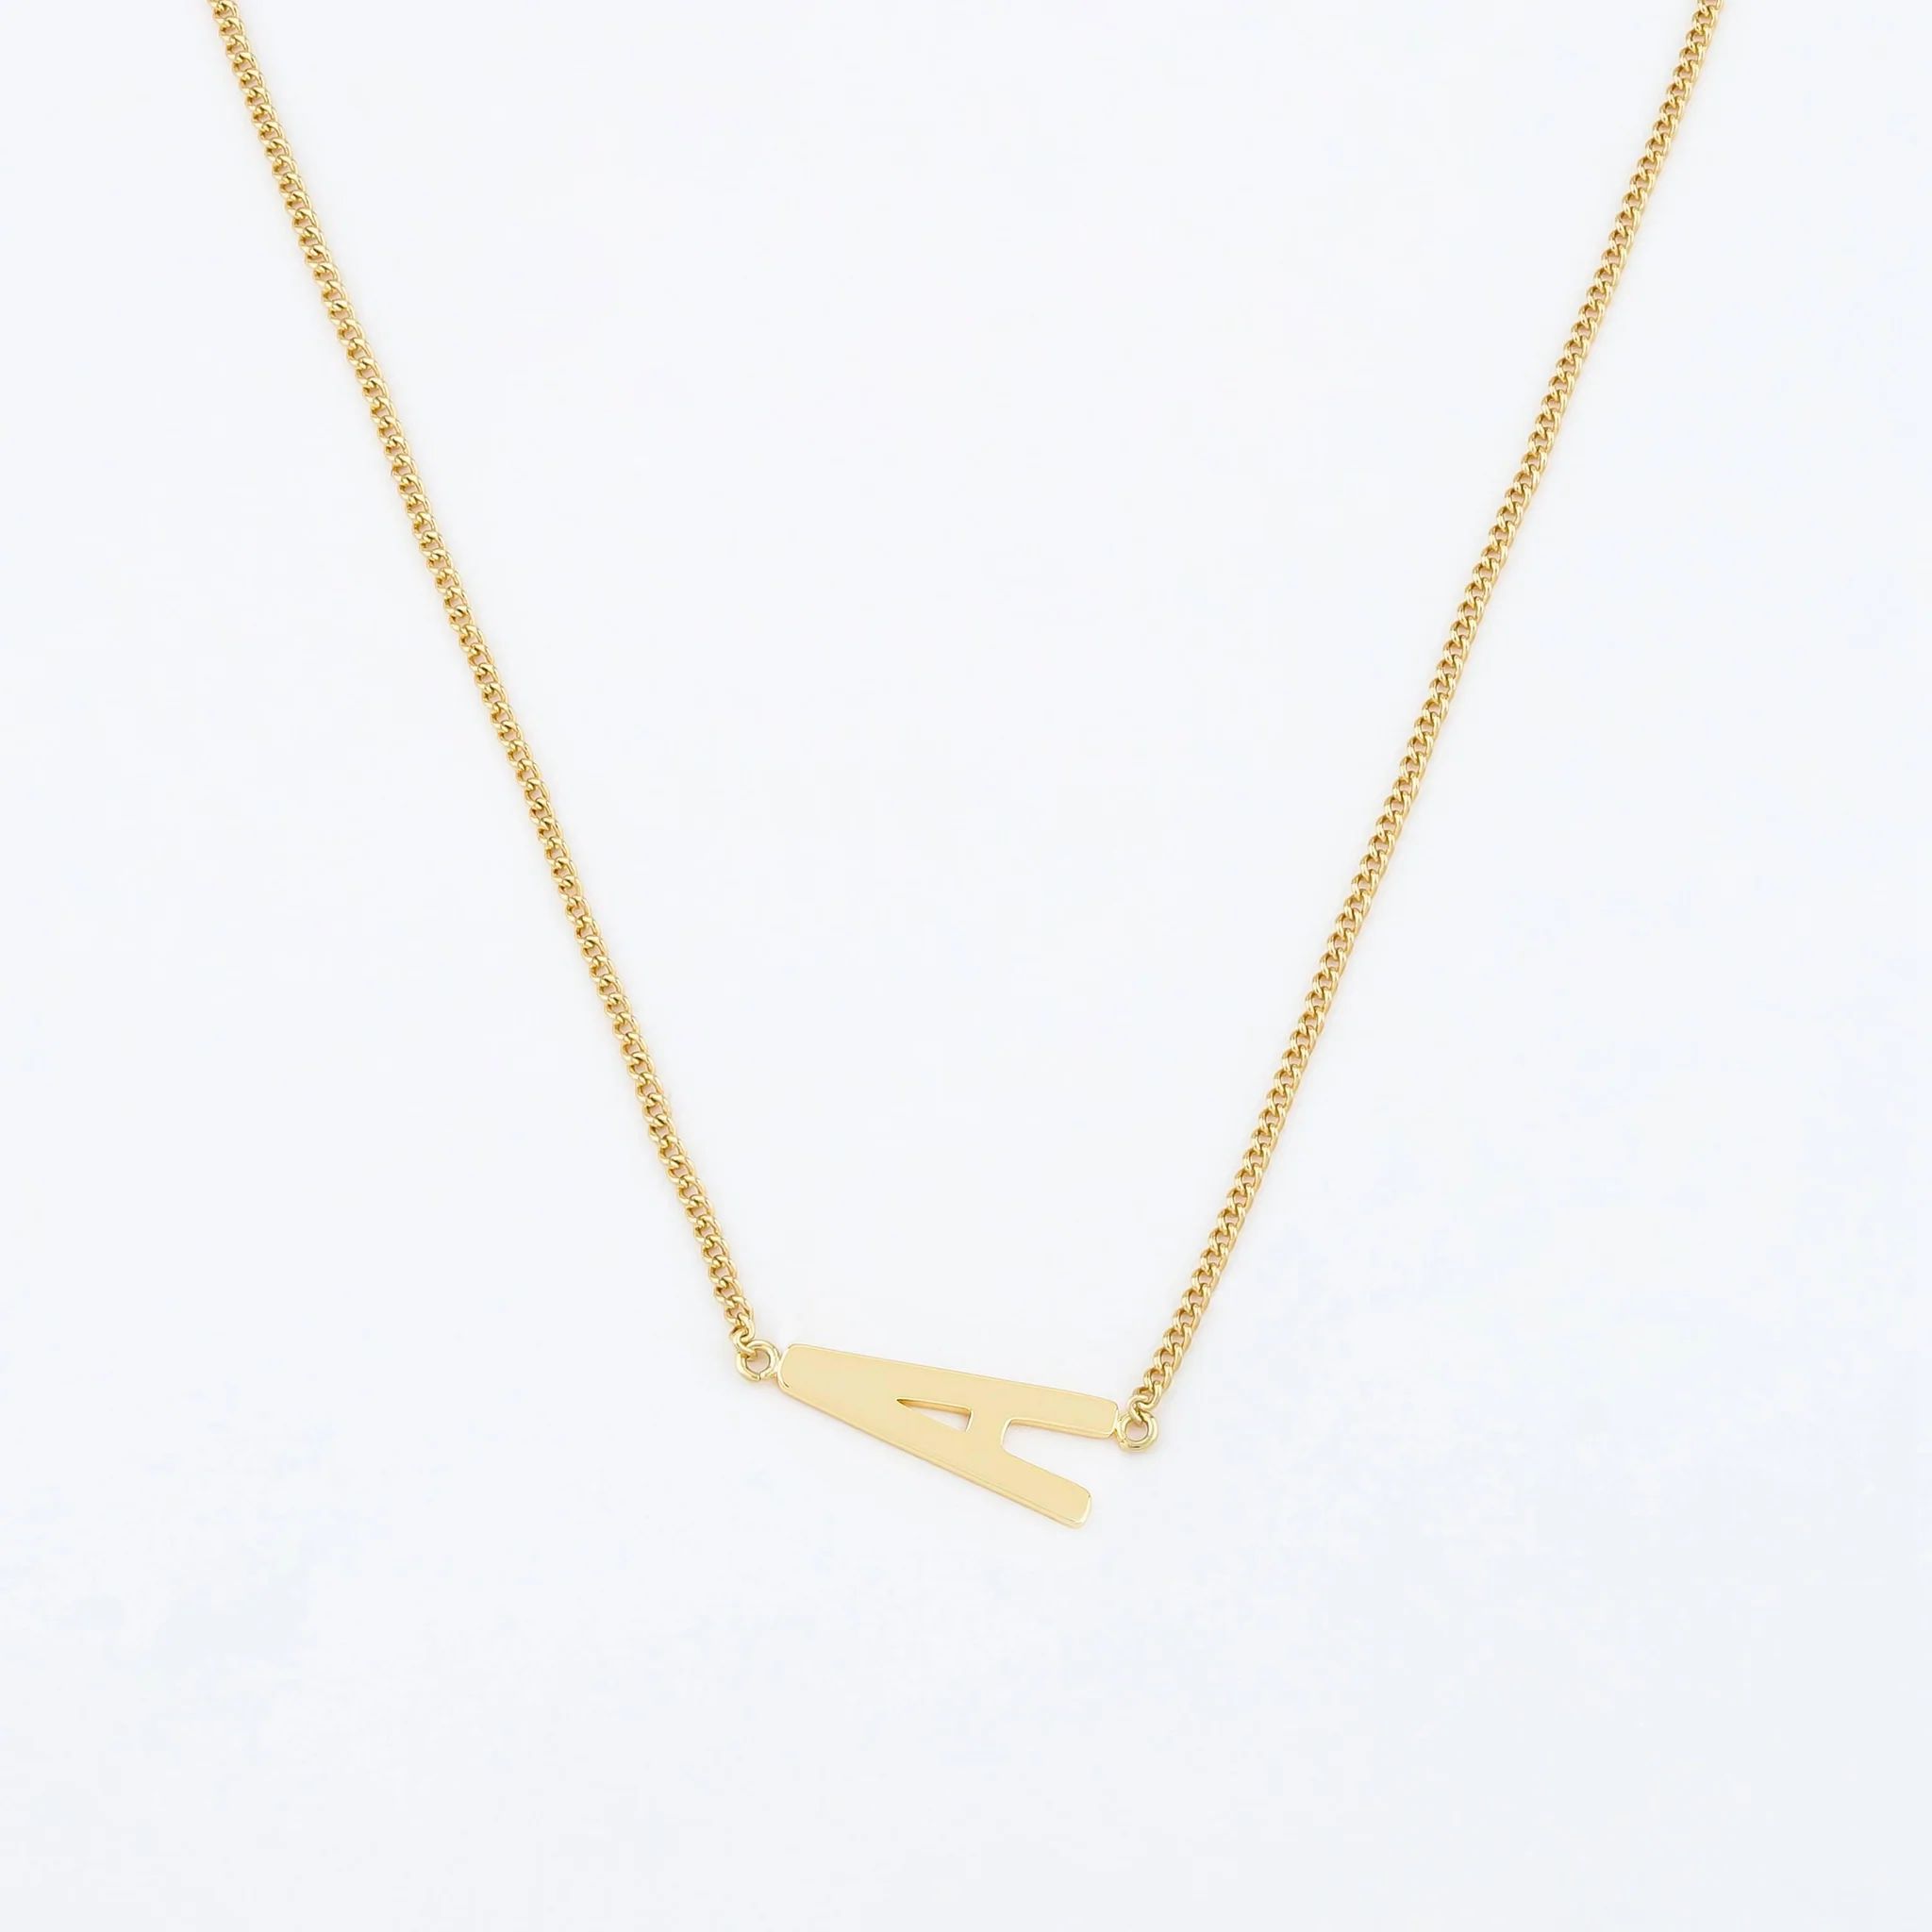 Personalized Initial Necklace | Victoria Emerson